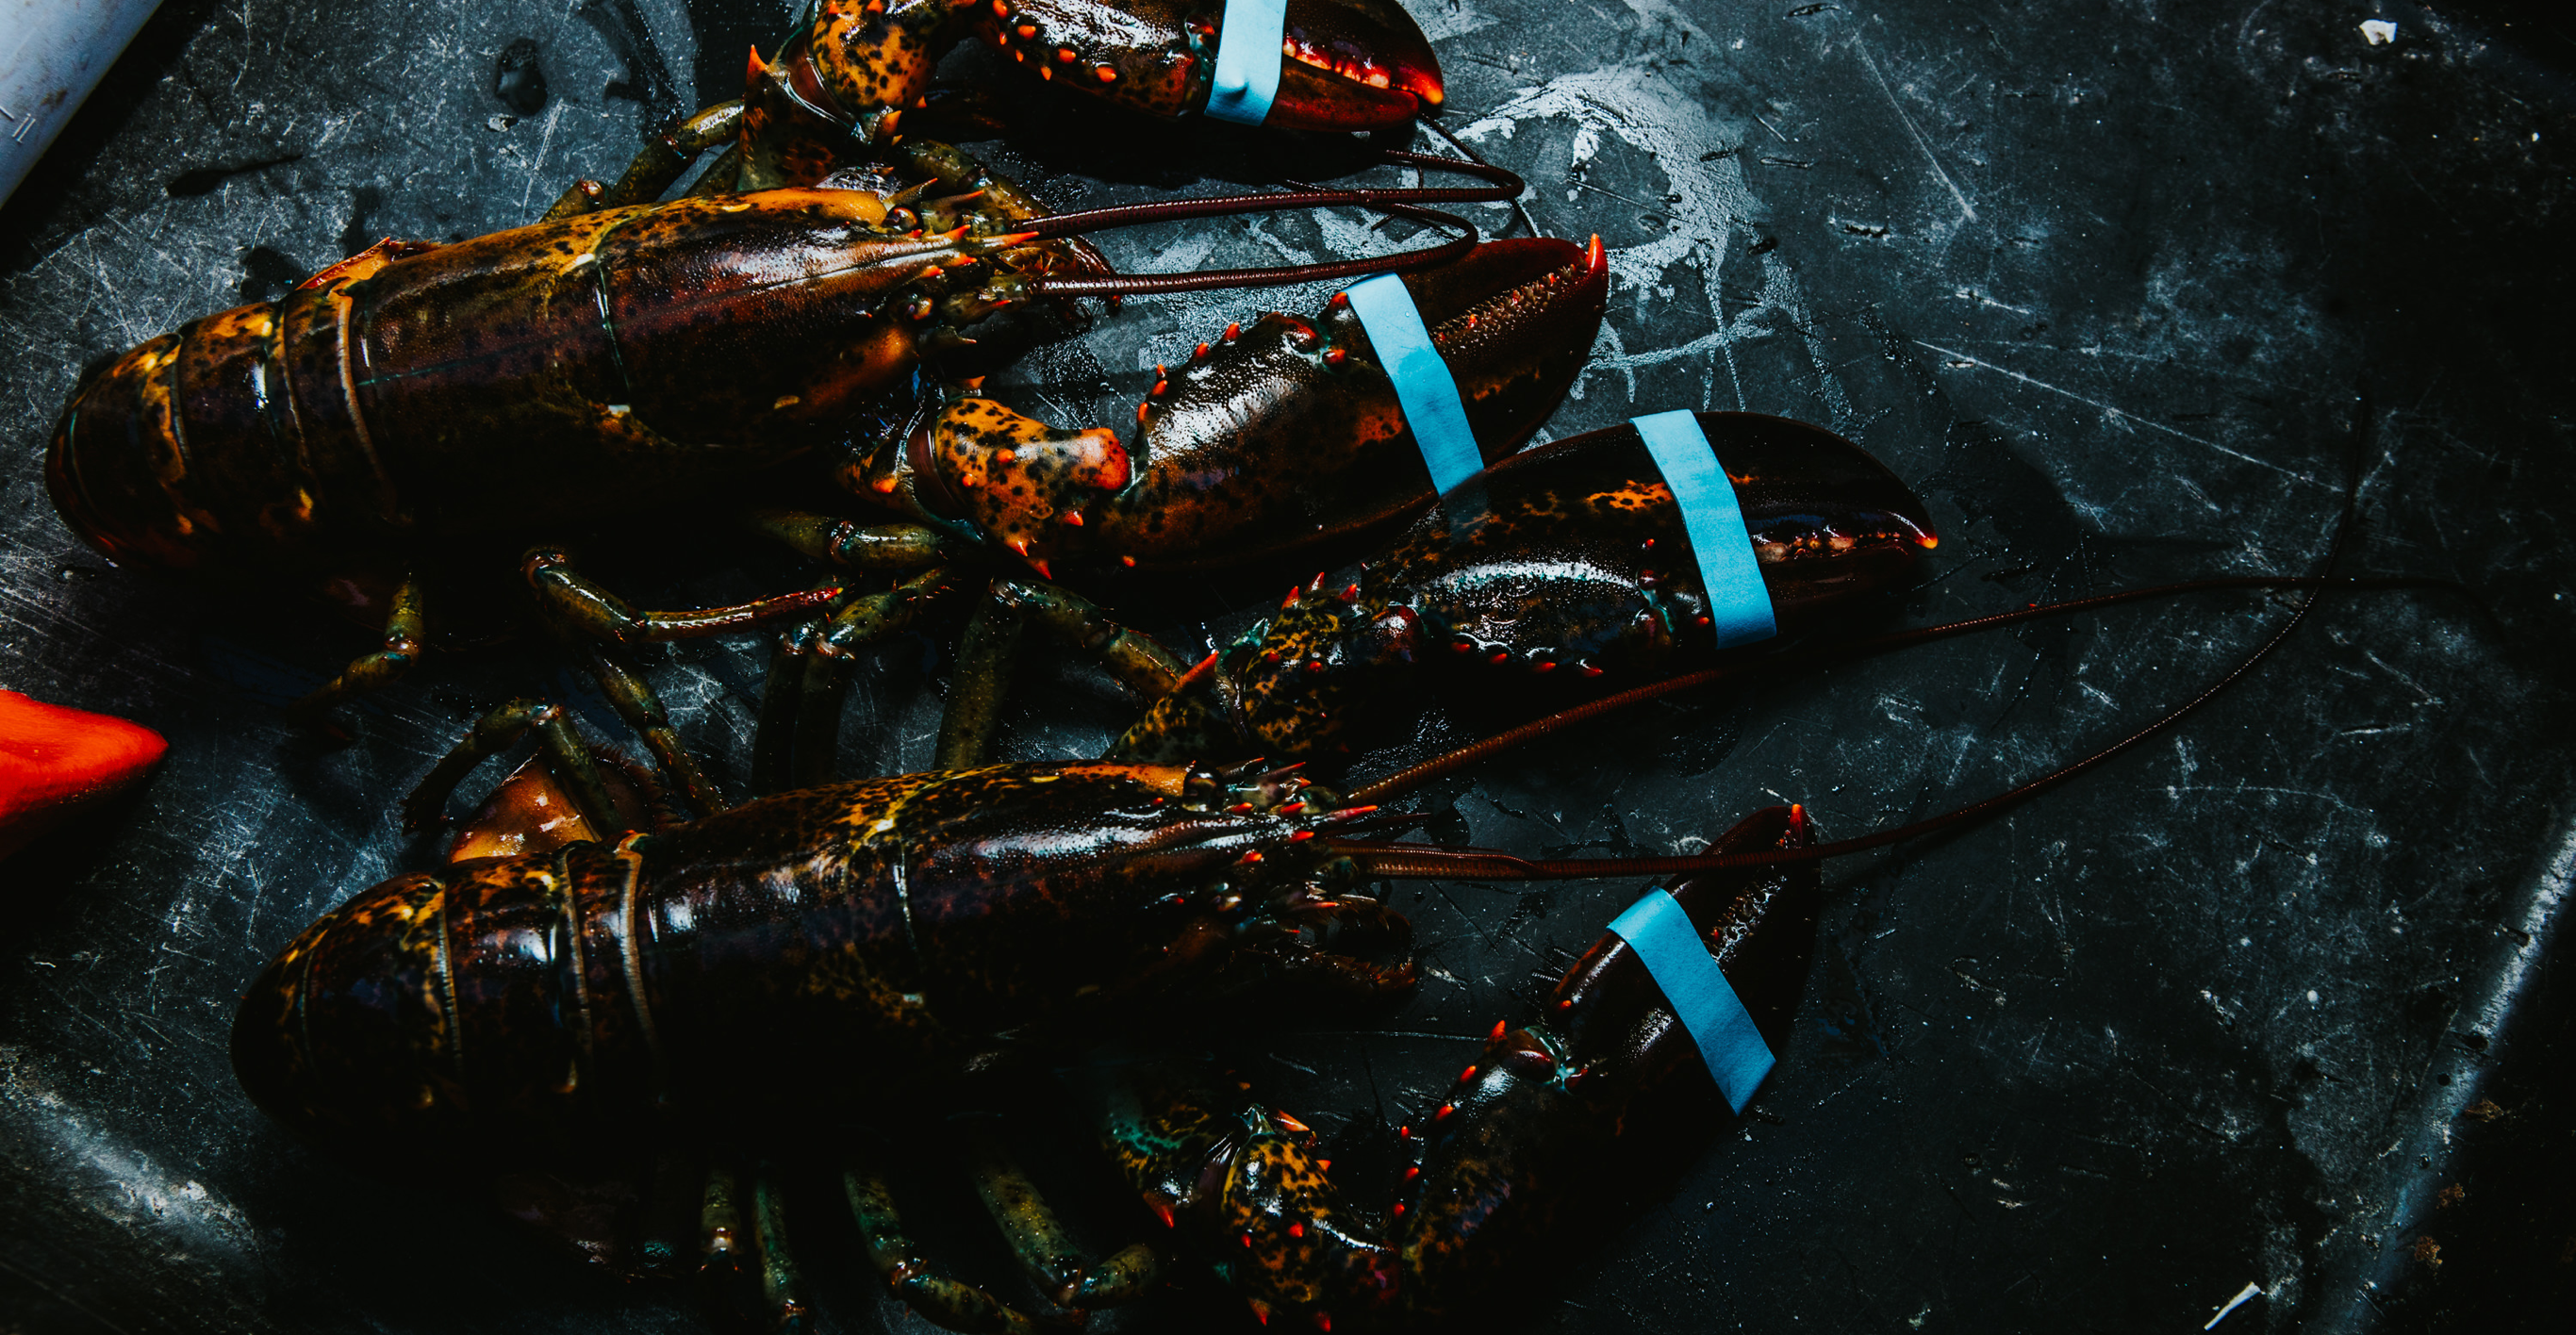 Live Maine Lobsters